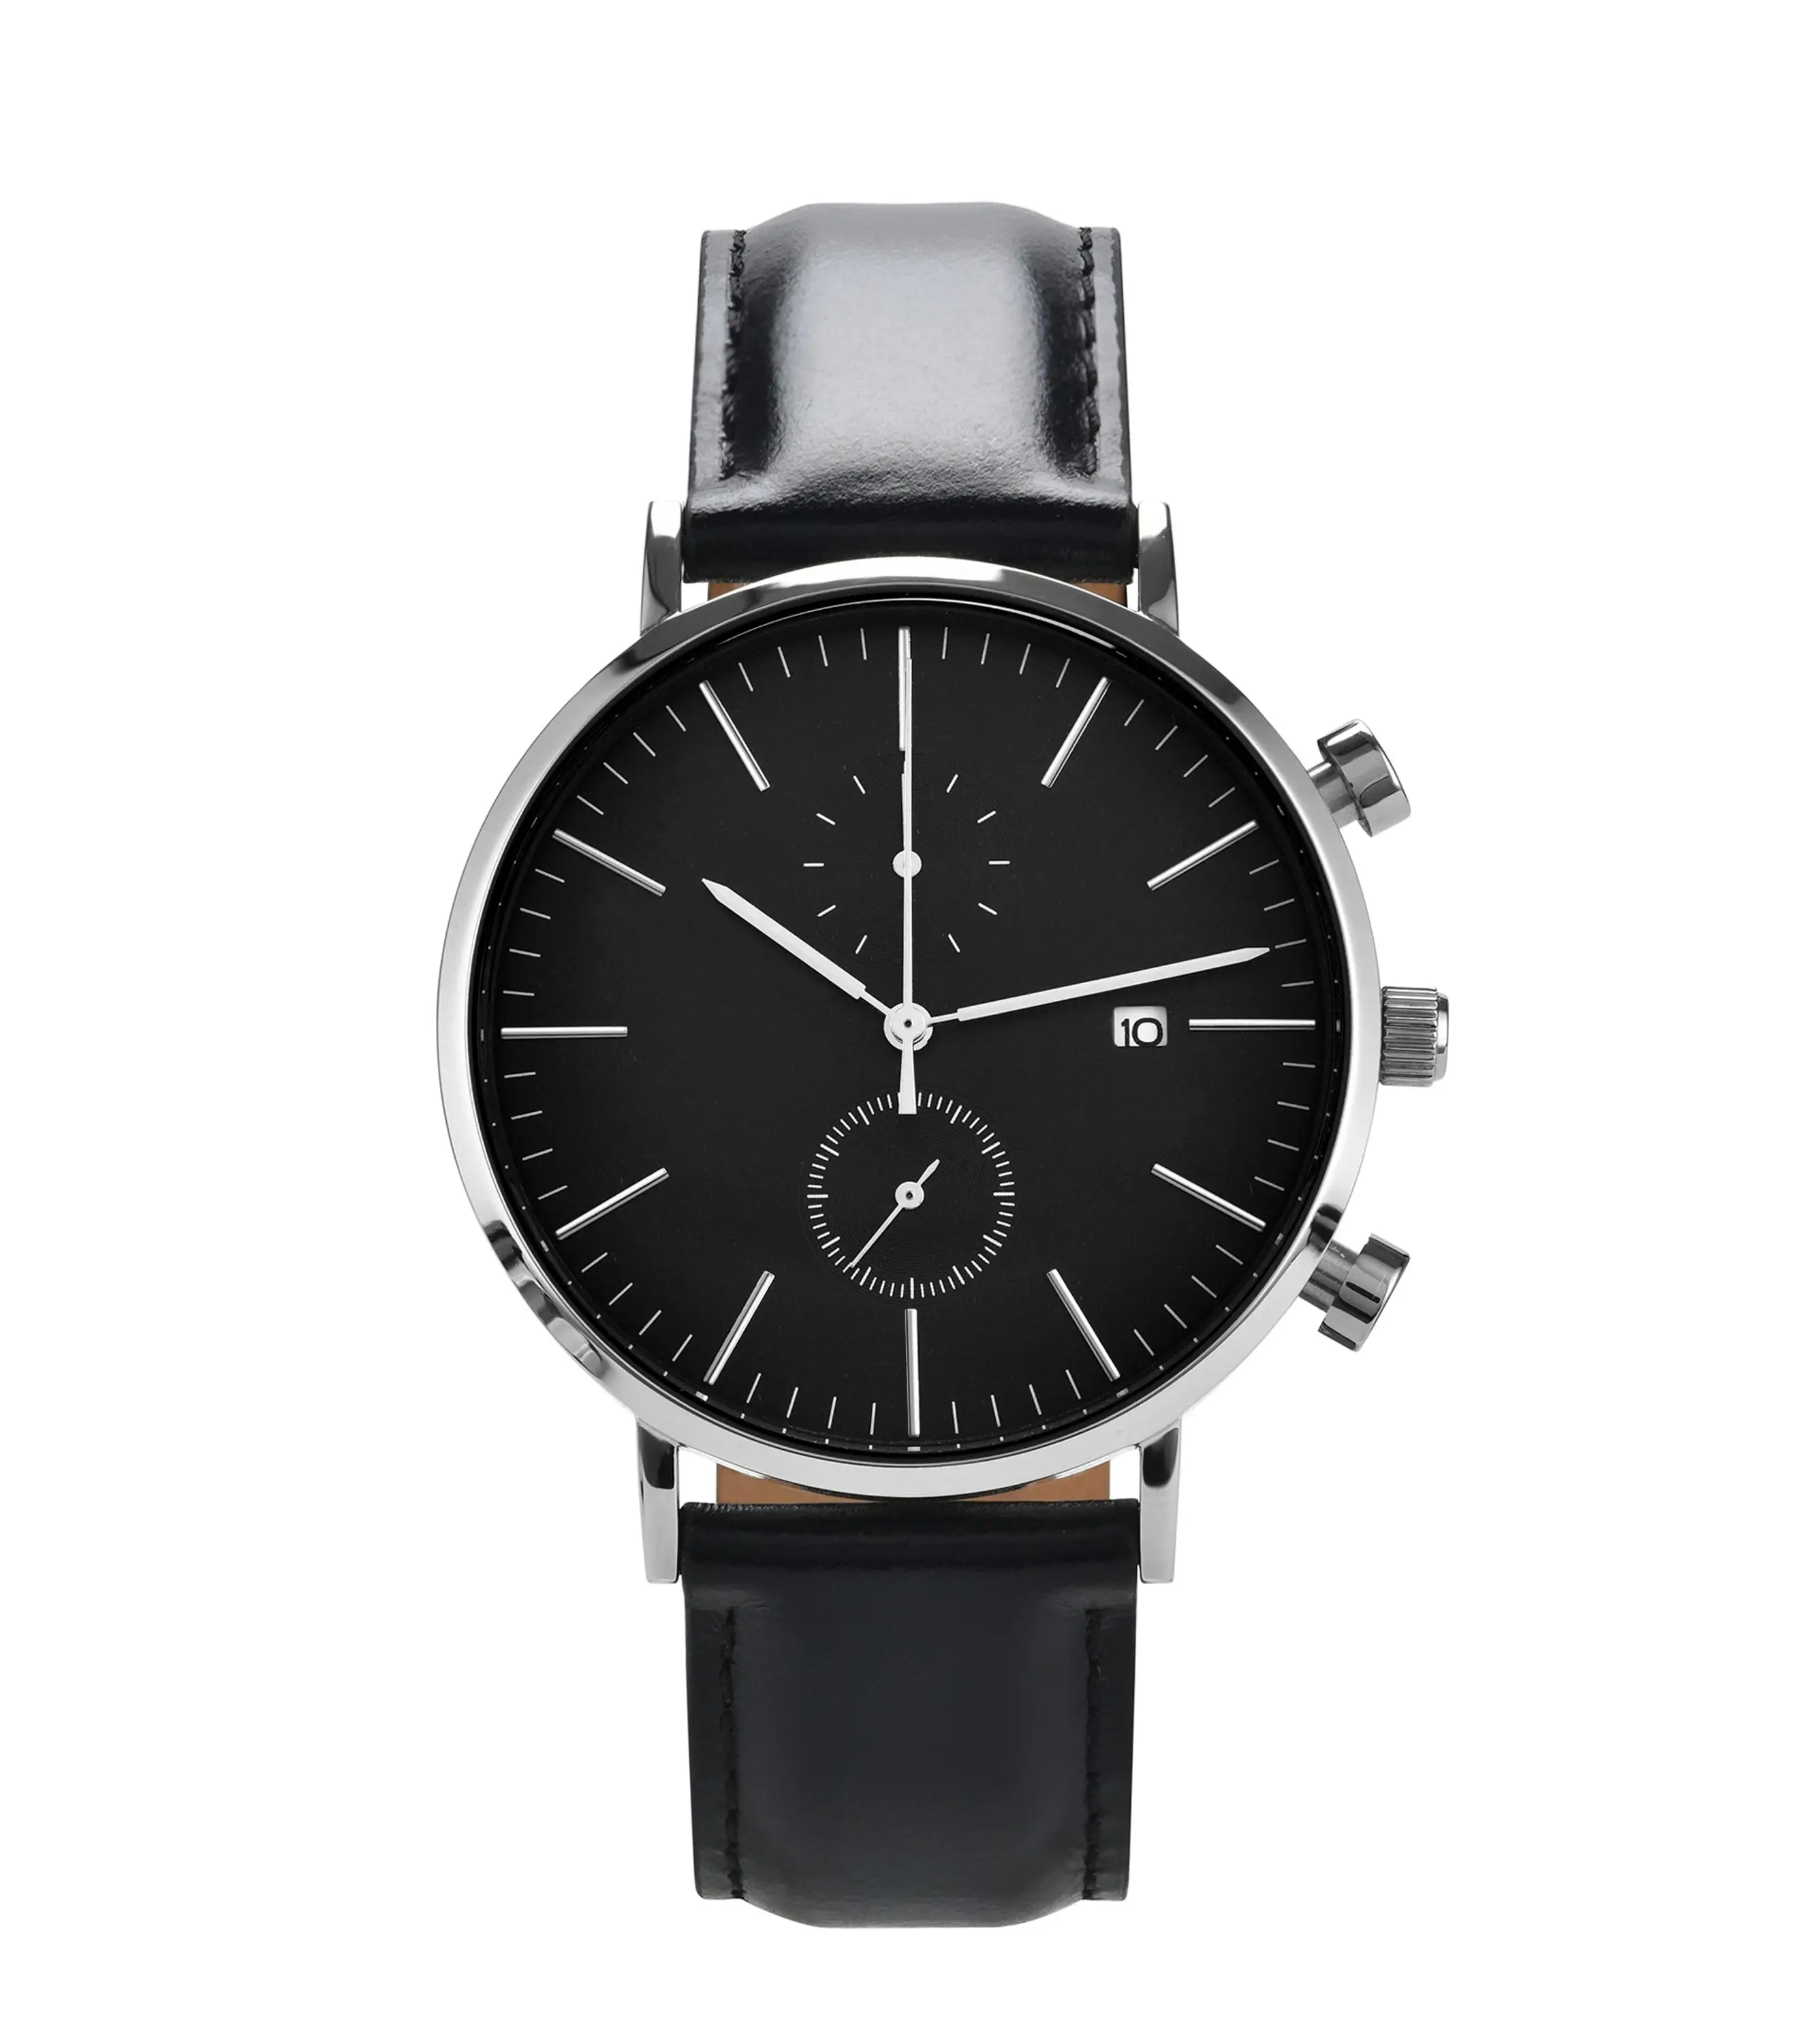 New Arrival Japan Movt Quartz Stainless Steel Back Water Resistant Watch 5 Atm Buy Stainless